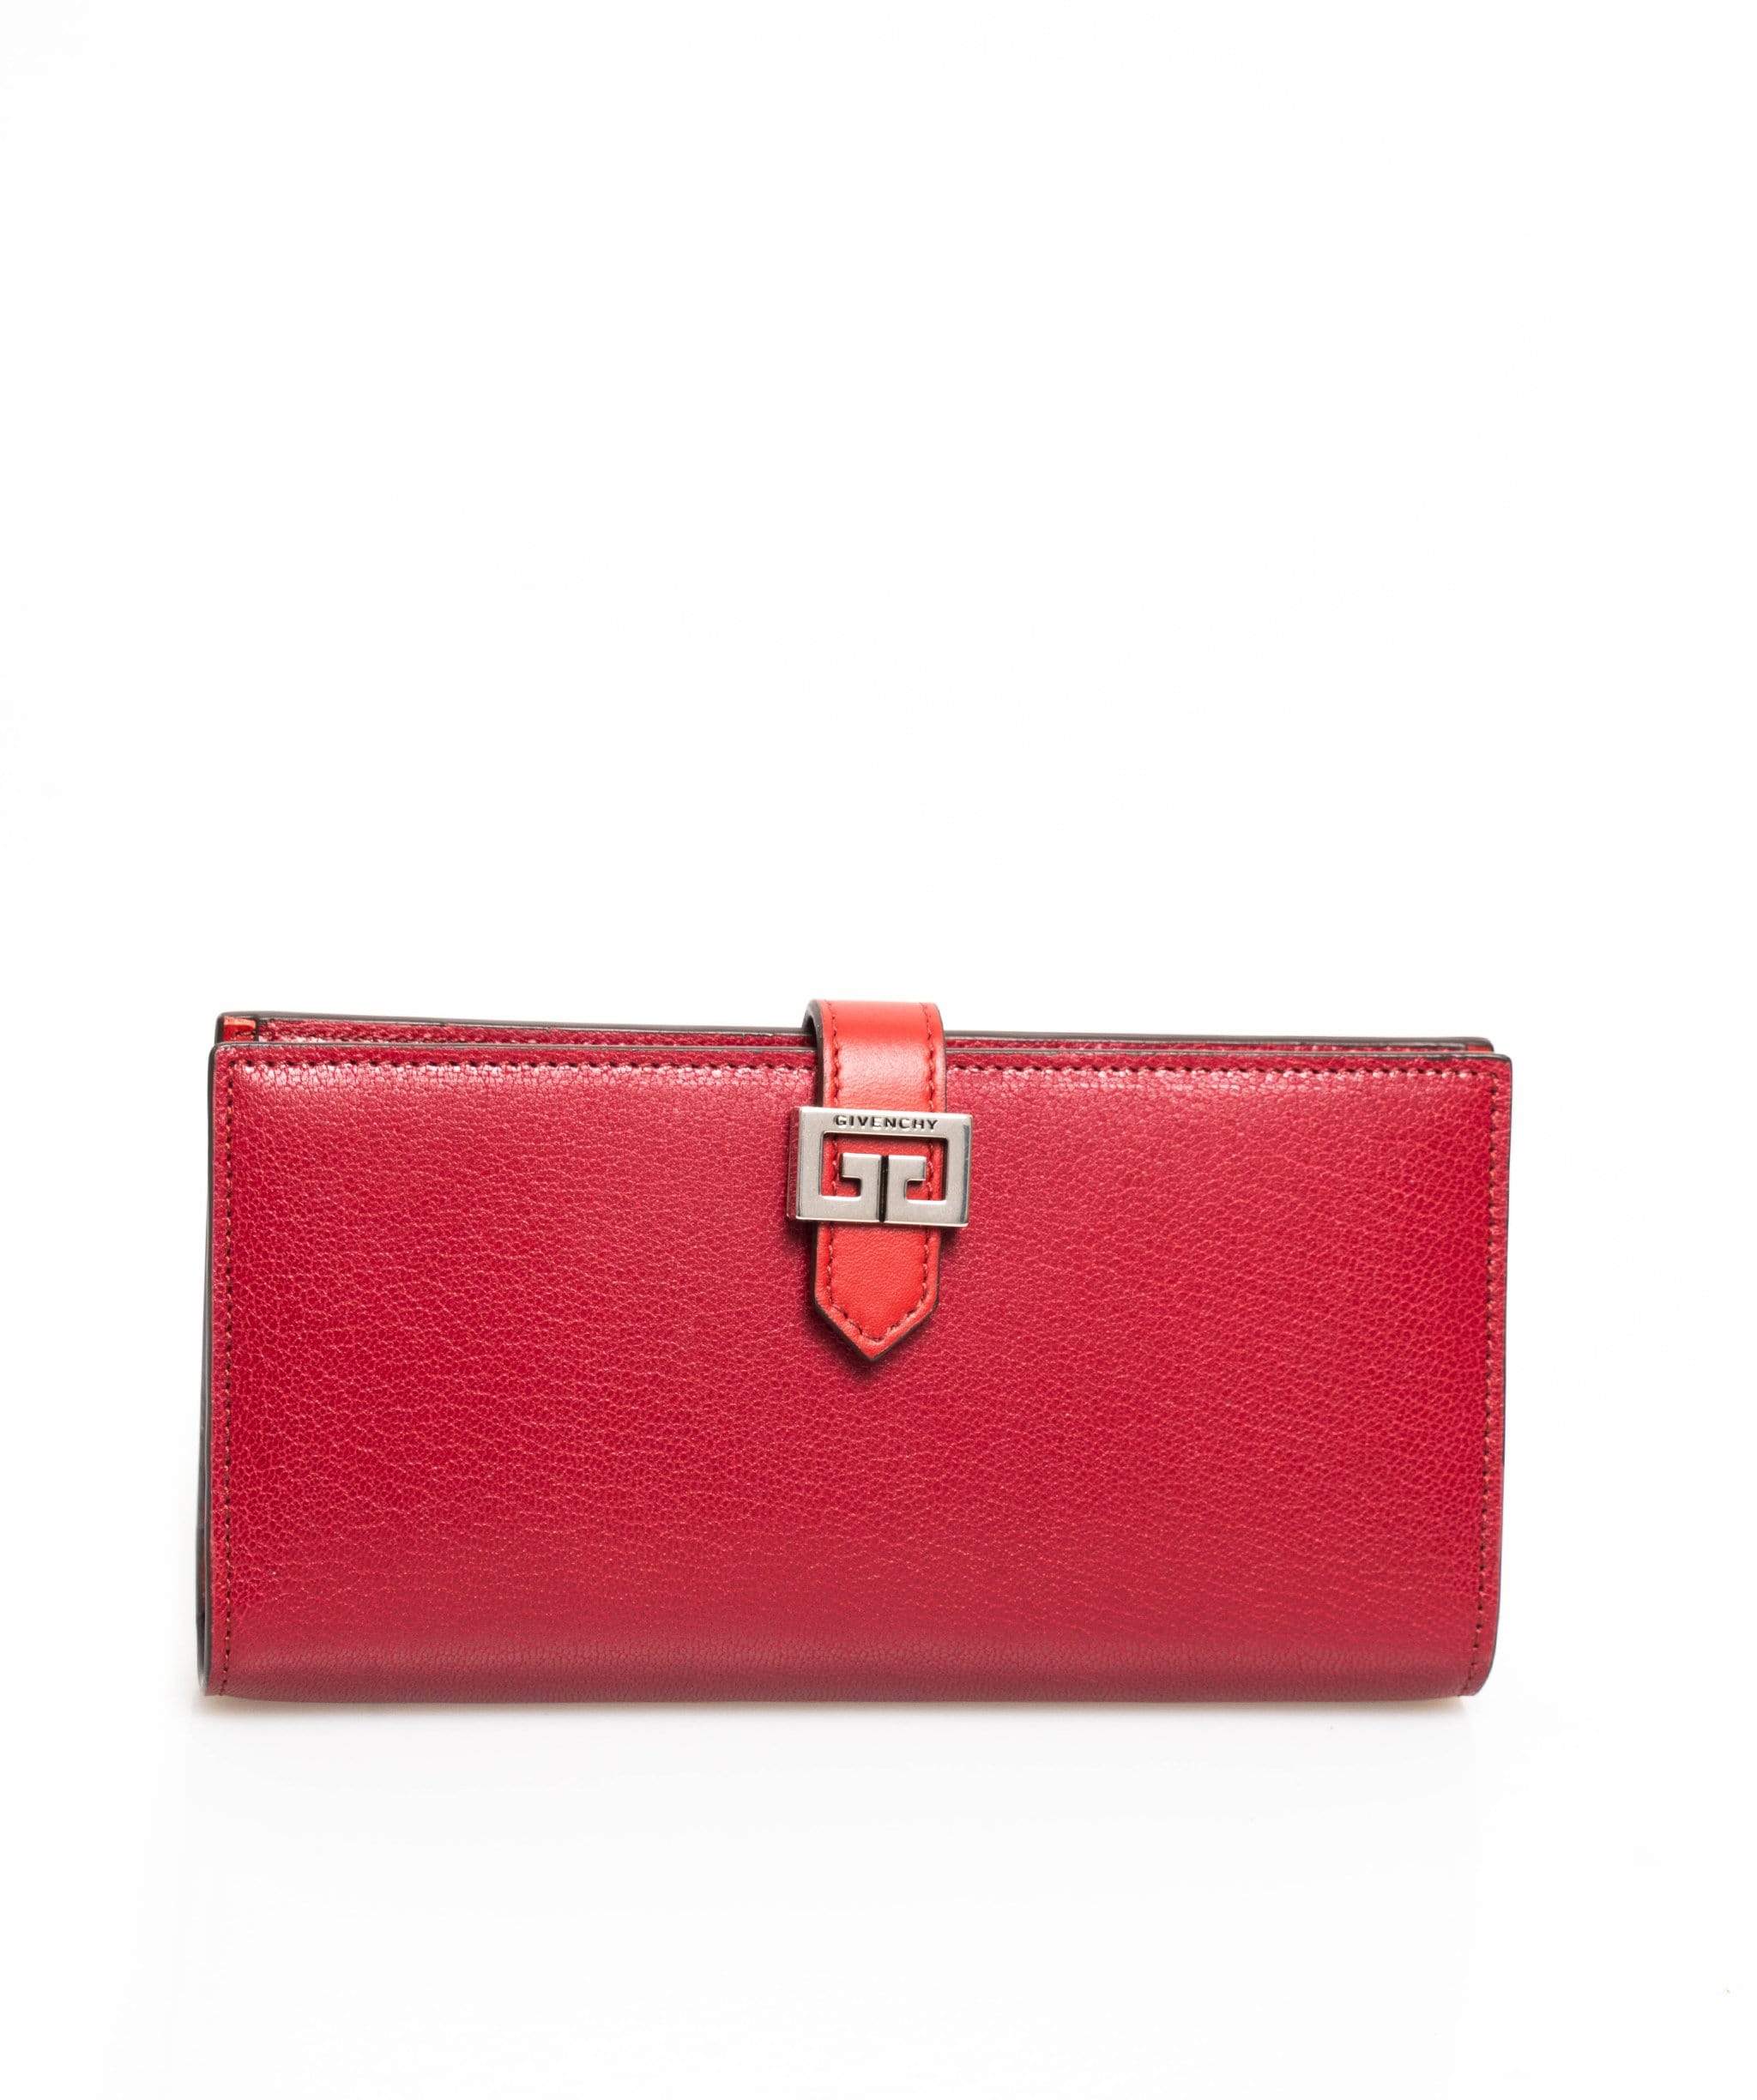 Givenchy Givenchy wallet dark red NW3095